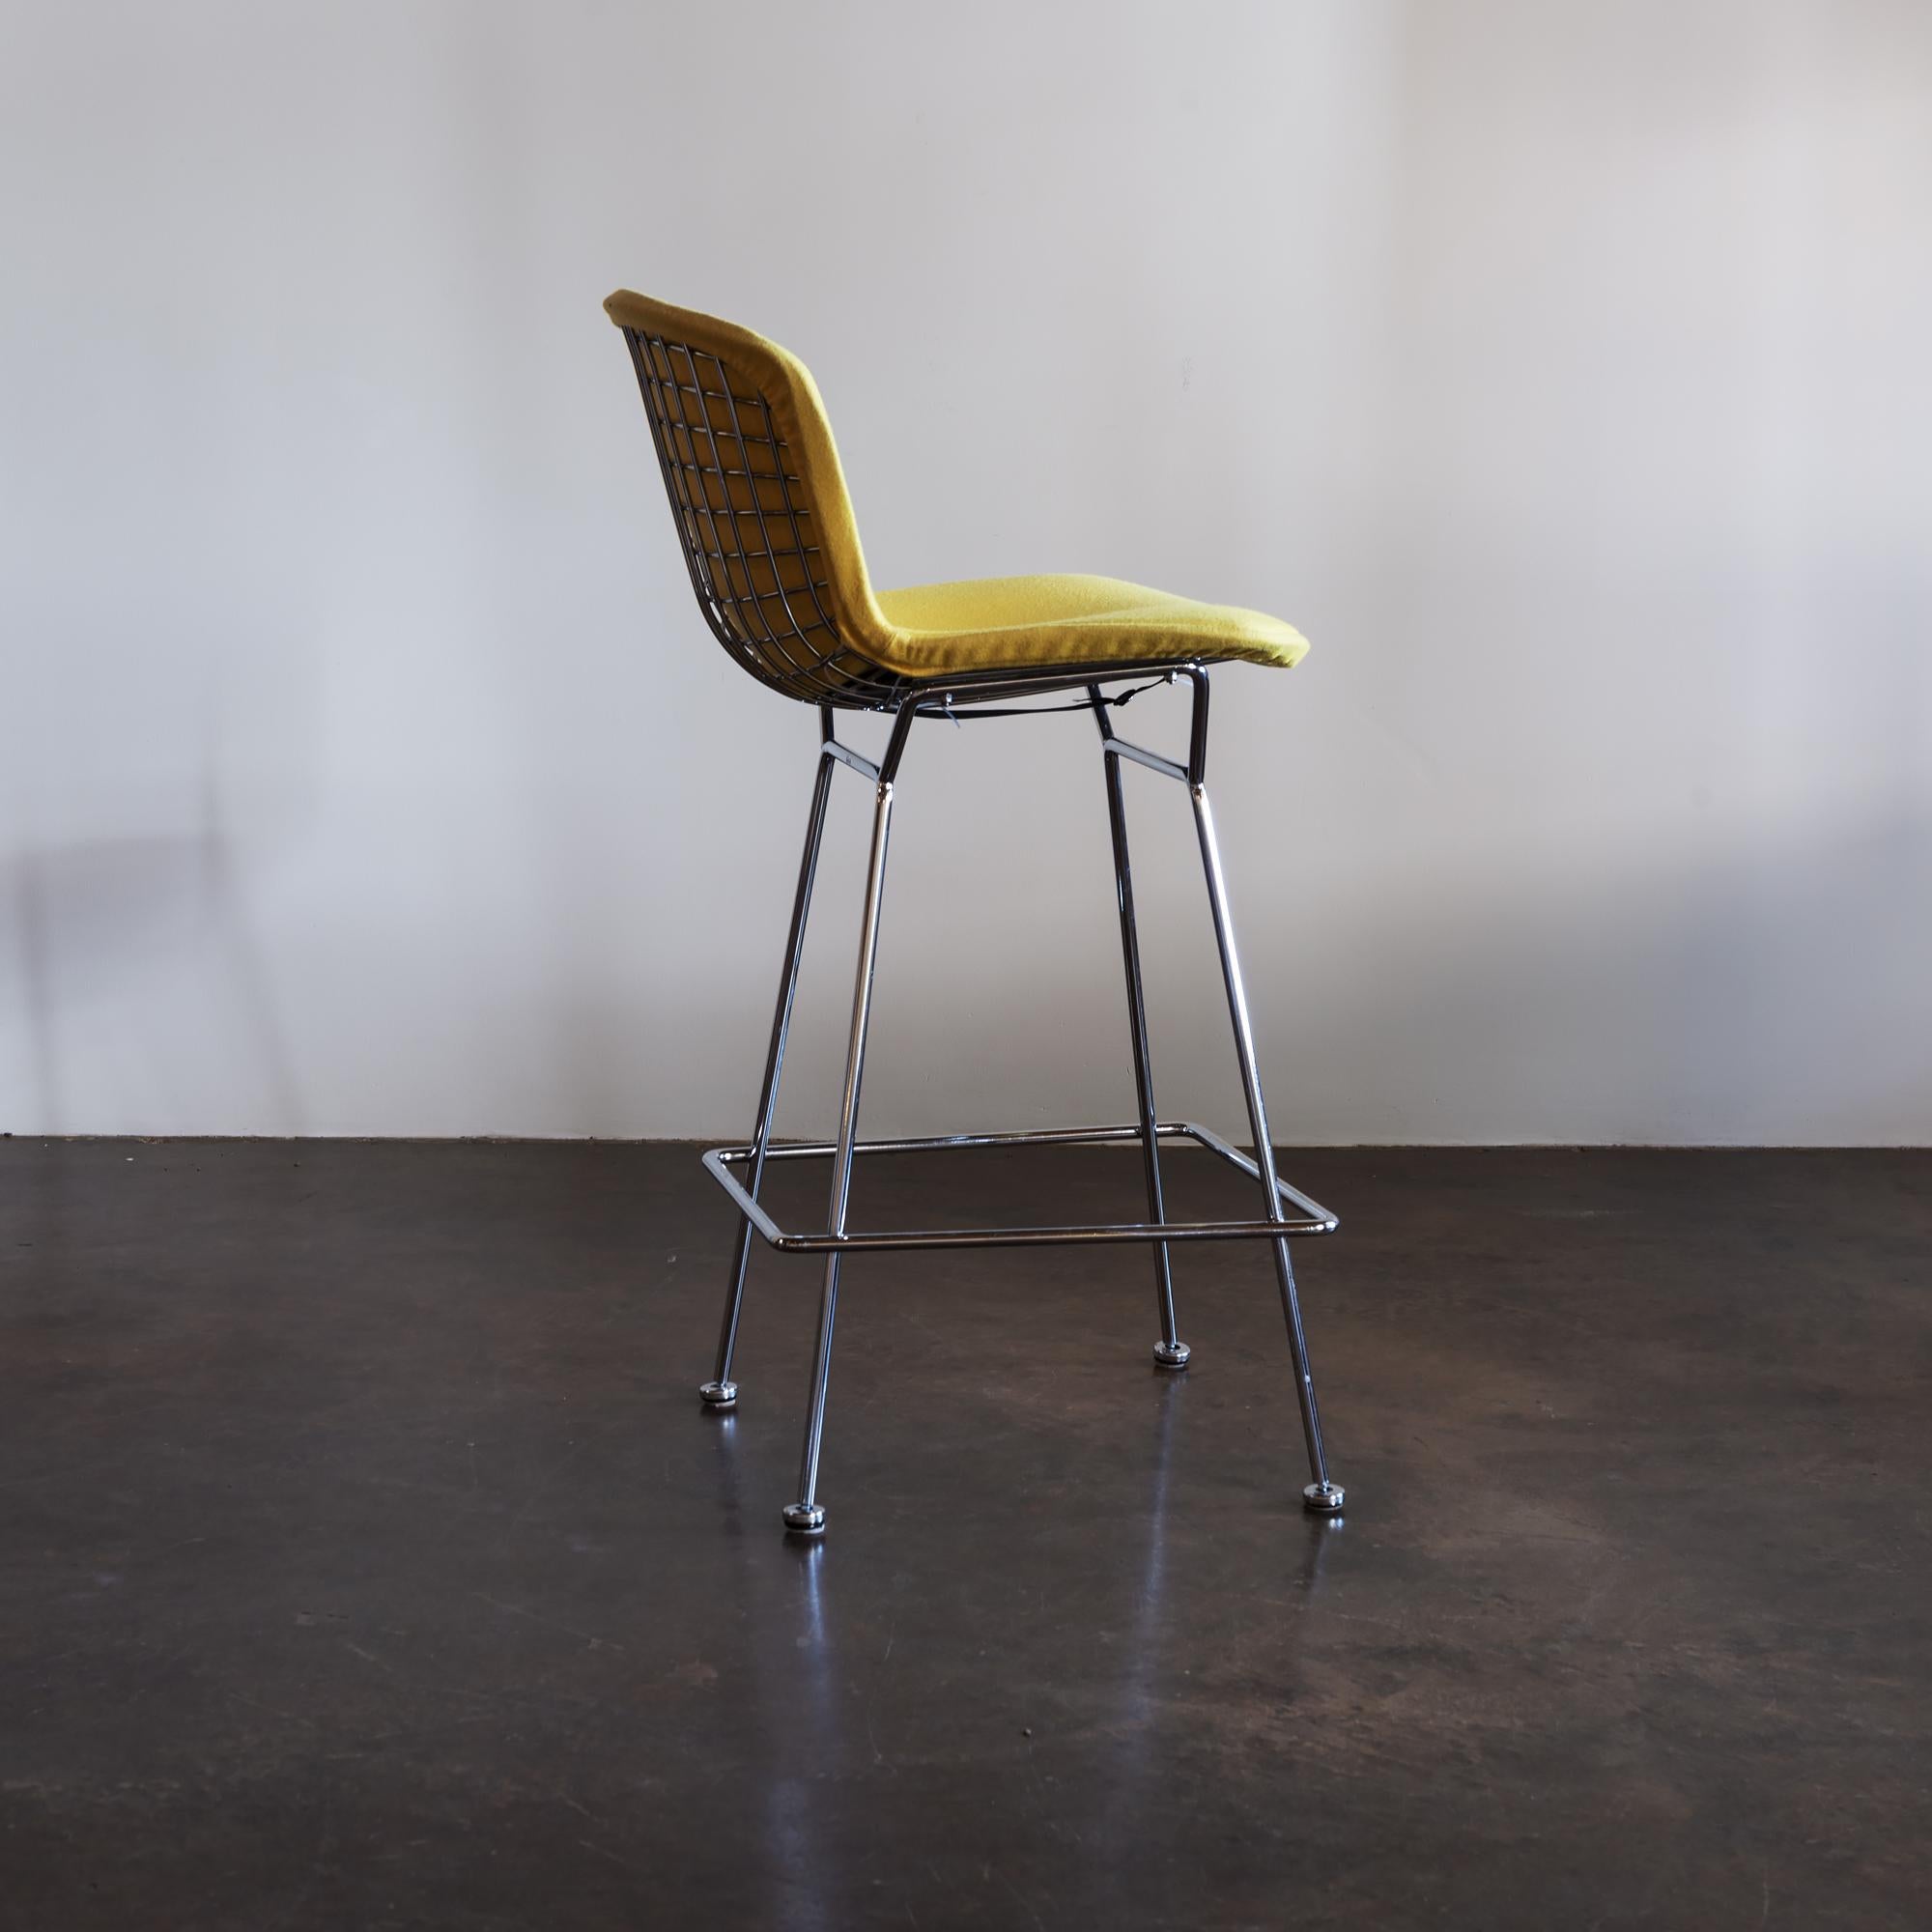 Iconic set of four bar stools by Harry Bertoia for Knoll International. Chrome frames with black leather seat pads. Set comes with original yellow covers. United States, 1970s.